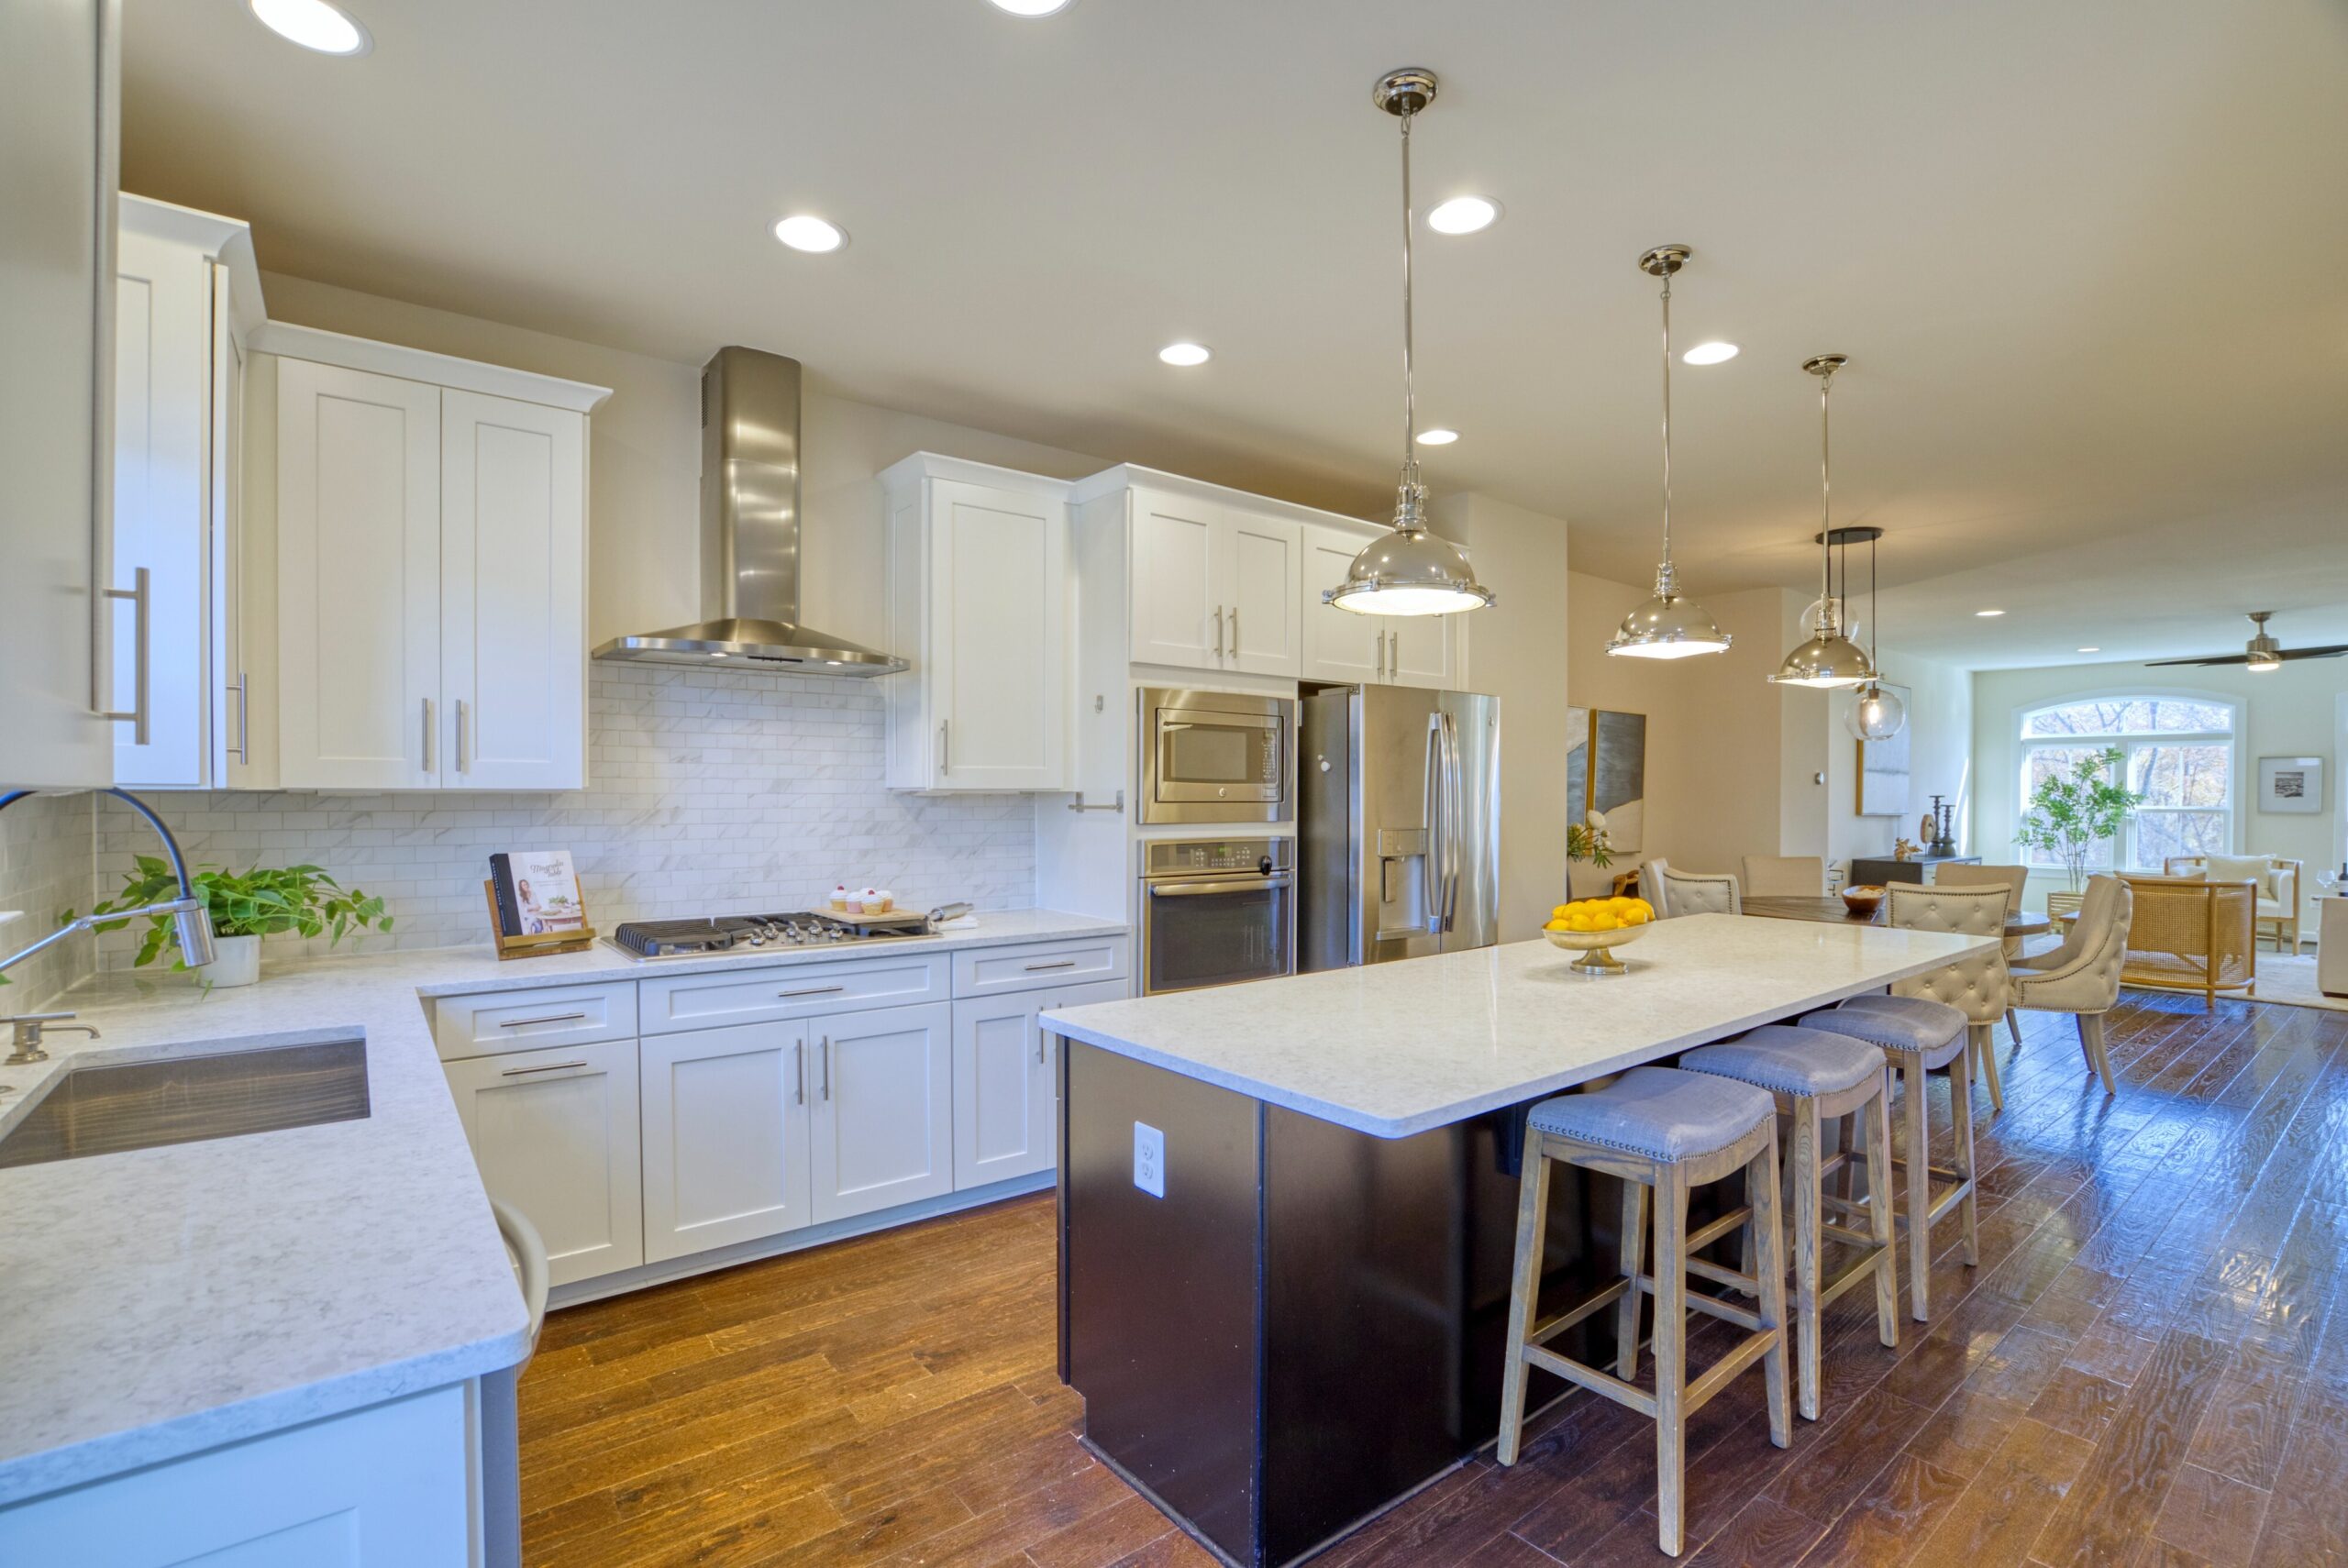 Professional interior photo of 3165 Virginia Bluebell Ct, Fairfax - showing the white kitchen and large island from an angle with view towards the living room